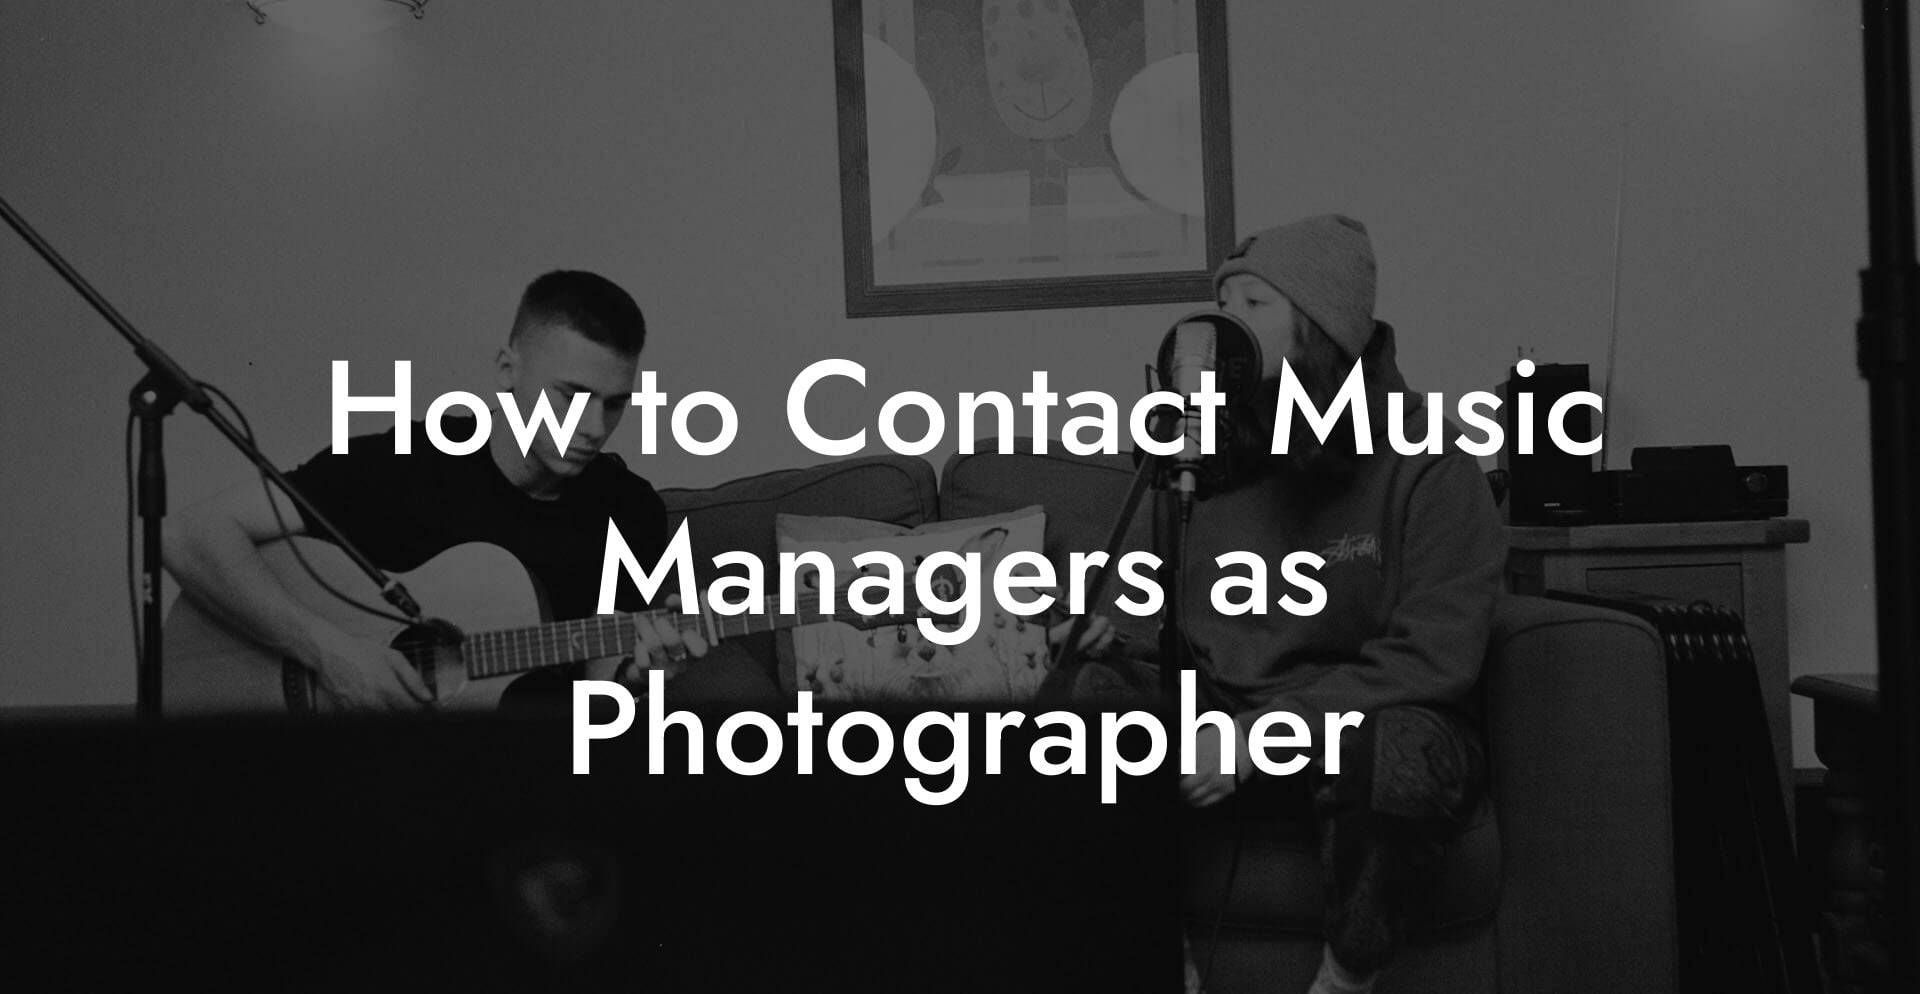 How to Contact Music Managers as Photographer